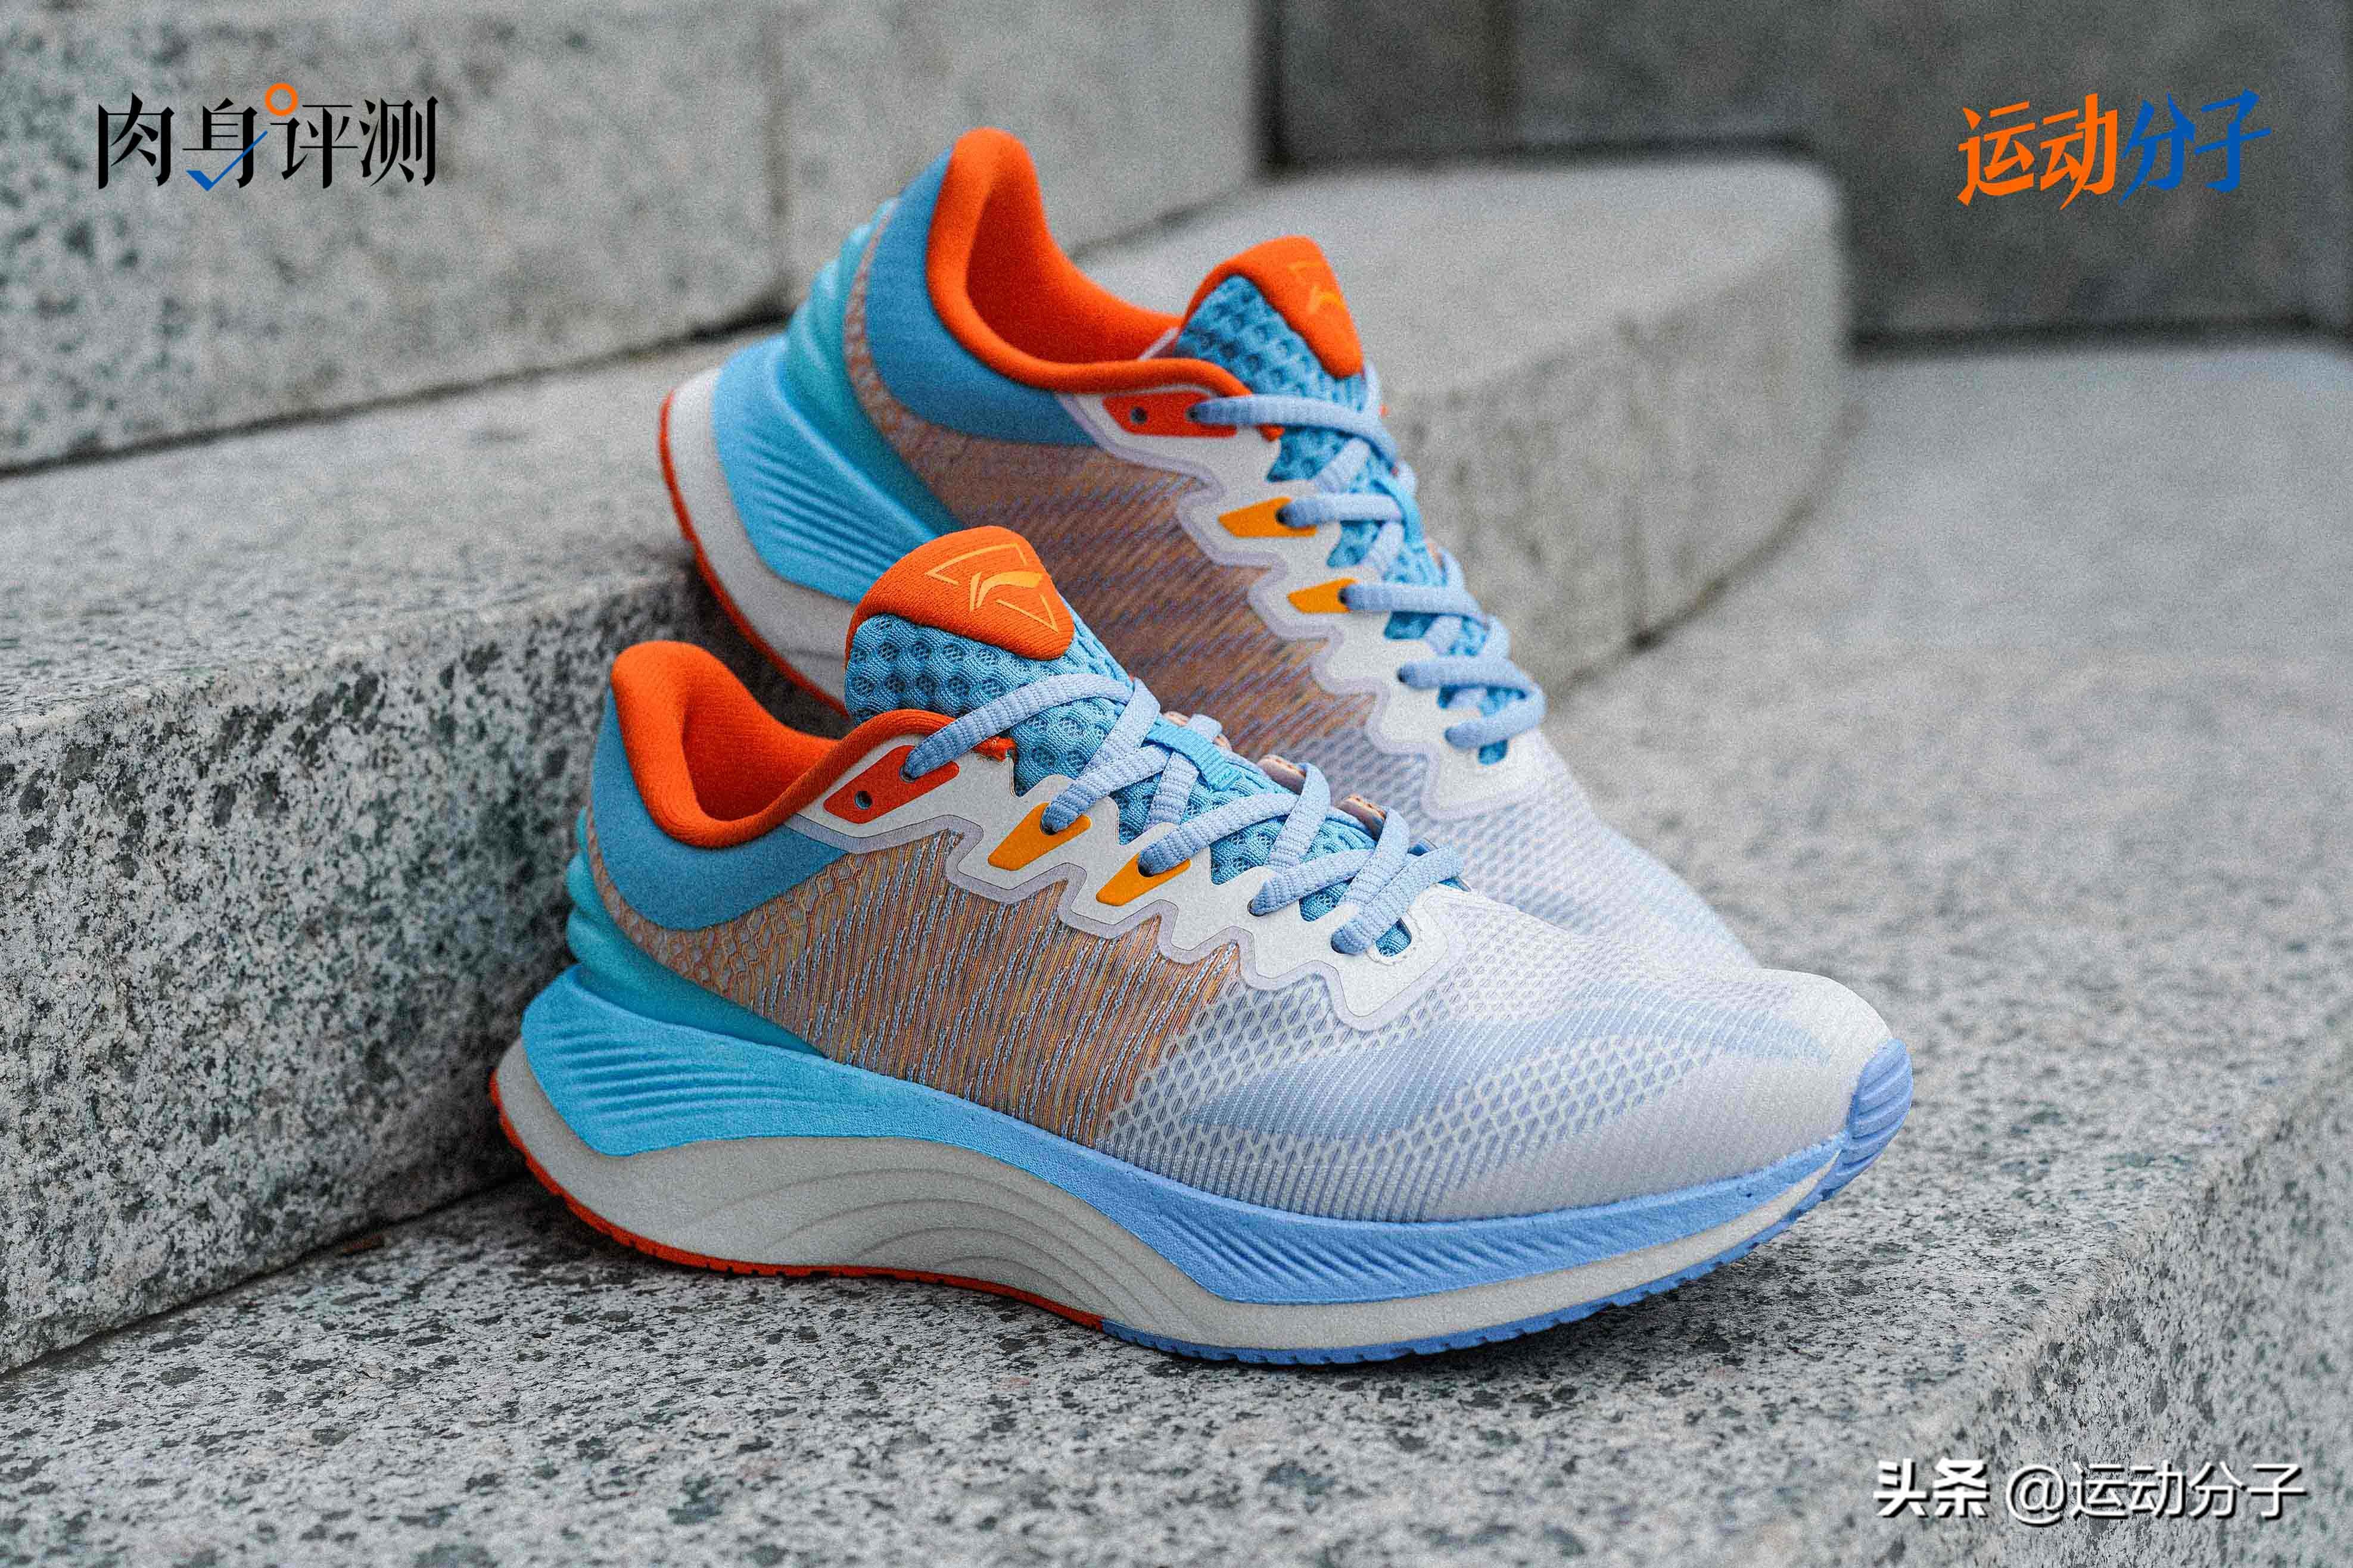 Li Ning Yueying: A pair of safe jogging shoes that do not show off ...